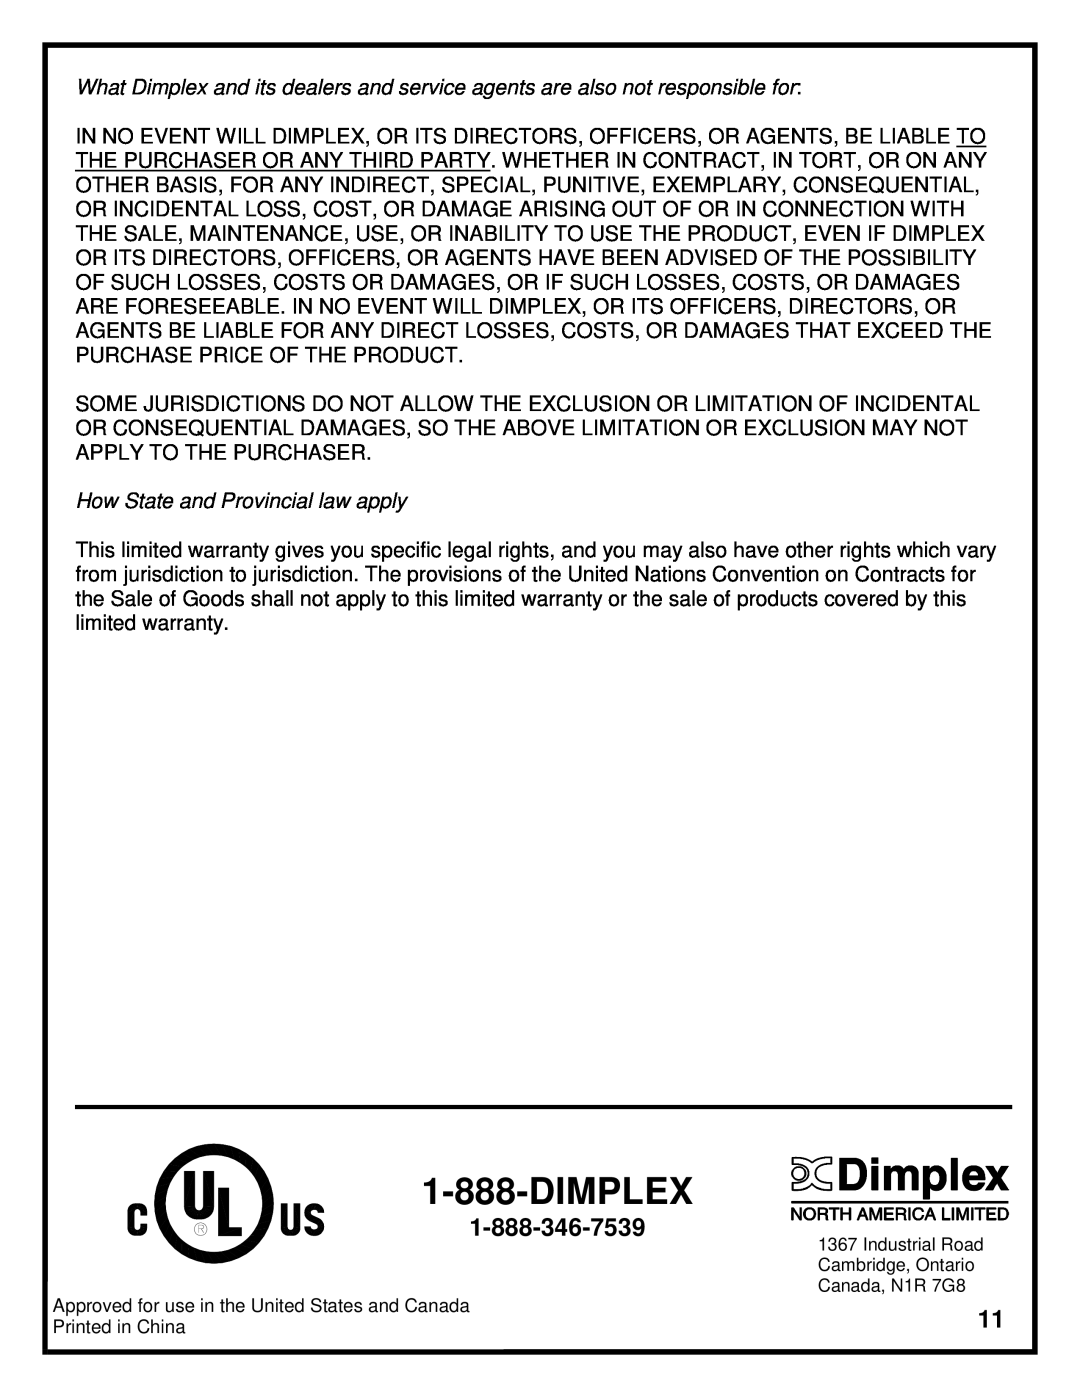 Dimplex DF2603 manual Dimplex, How State and Provincial law apply 